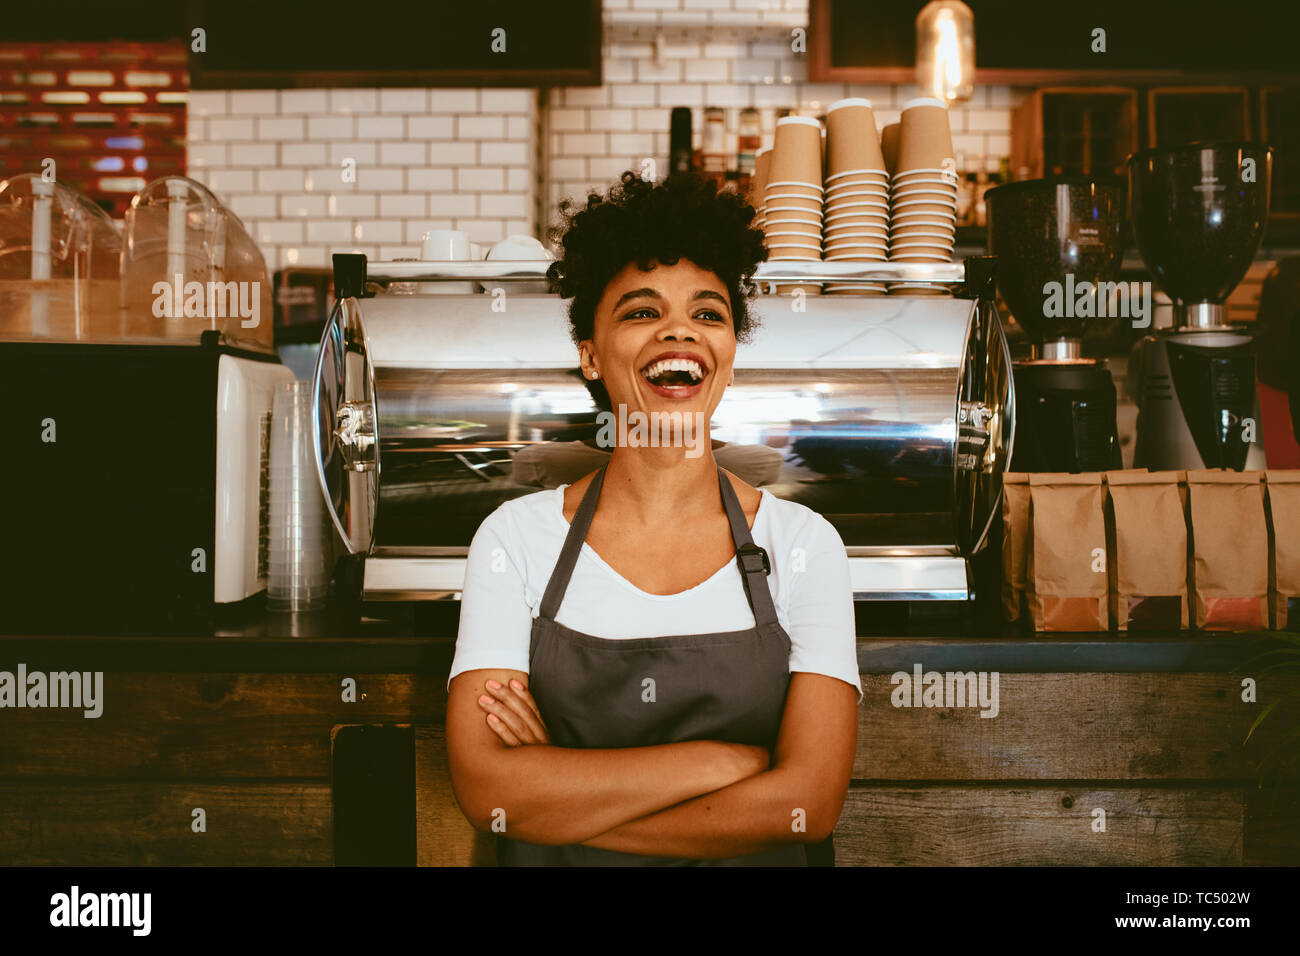 Woman barista inside her coffee shop. Woman bartender in cheerful mood standing in front on the counter. Stock Photo